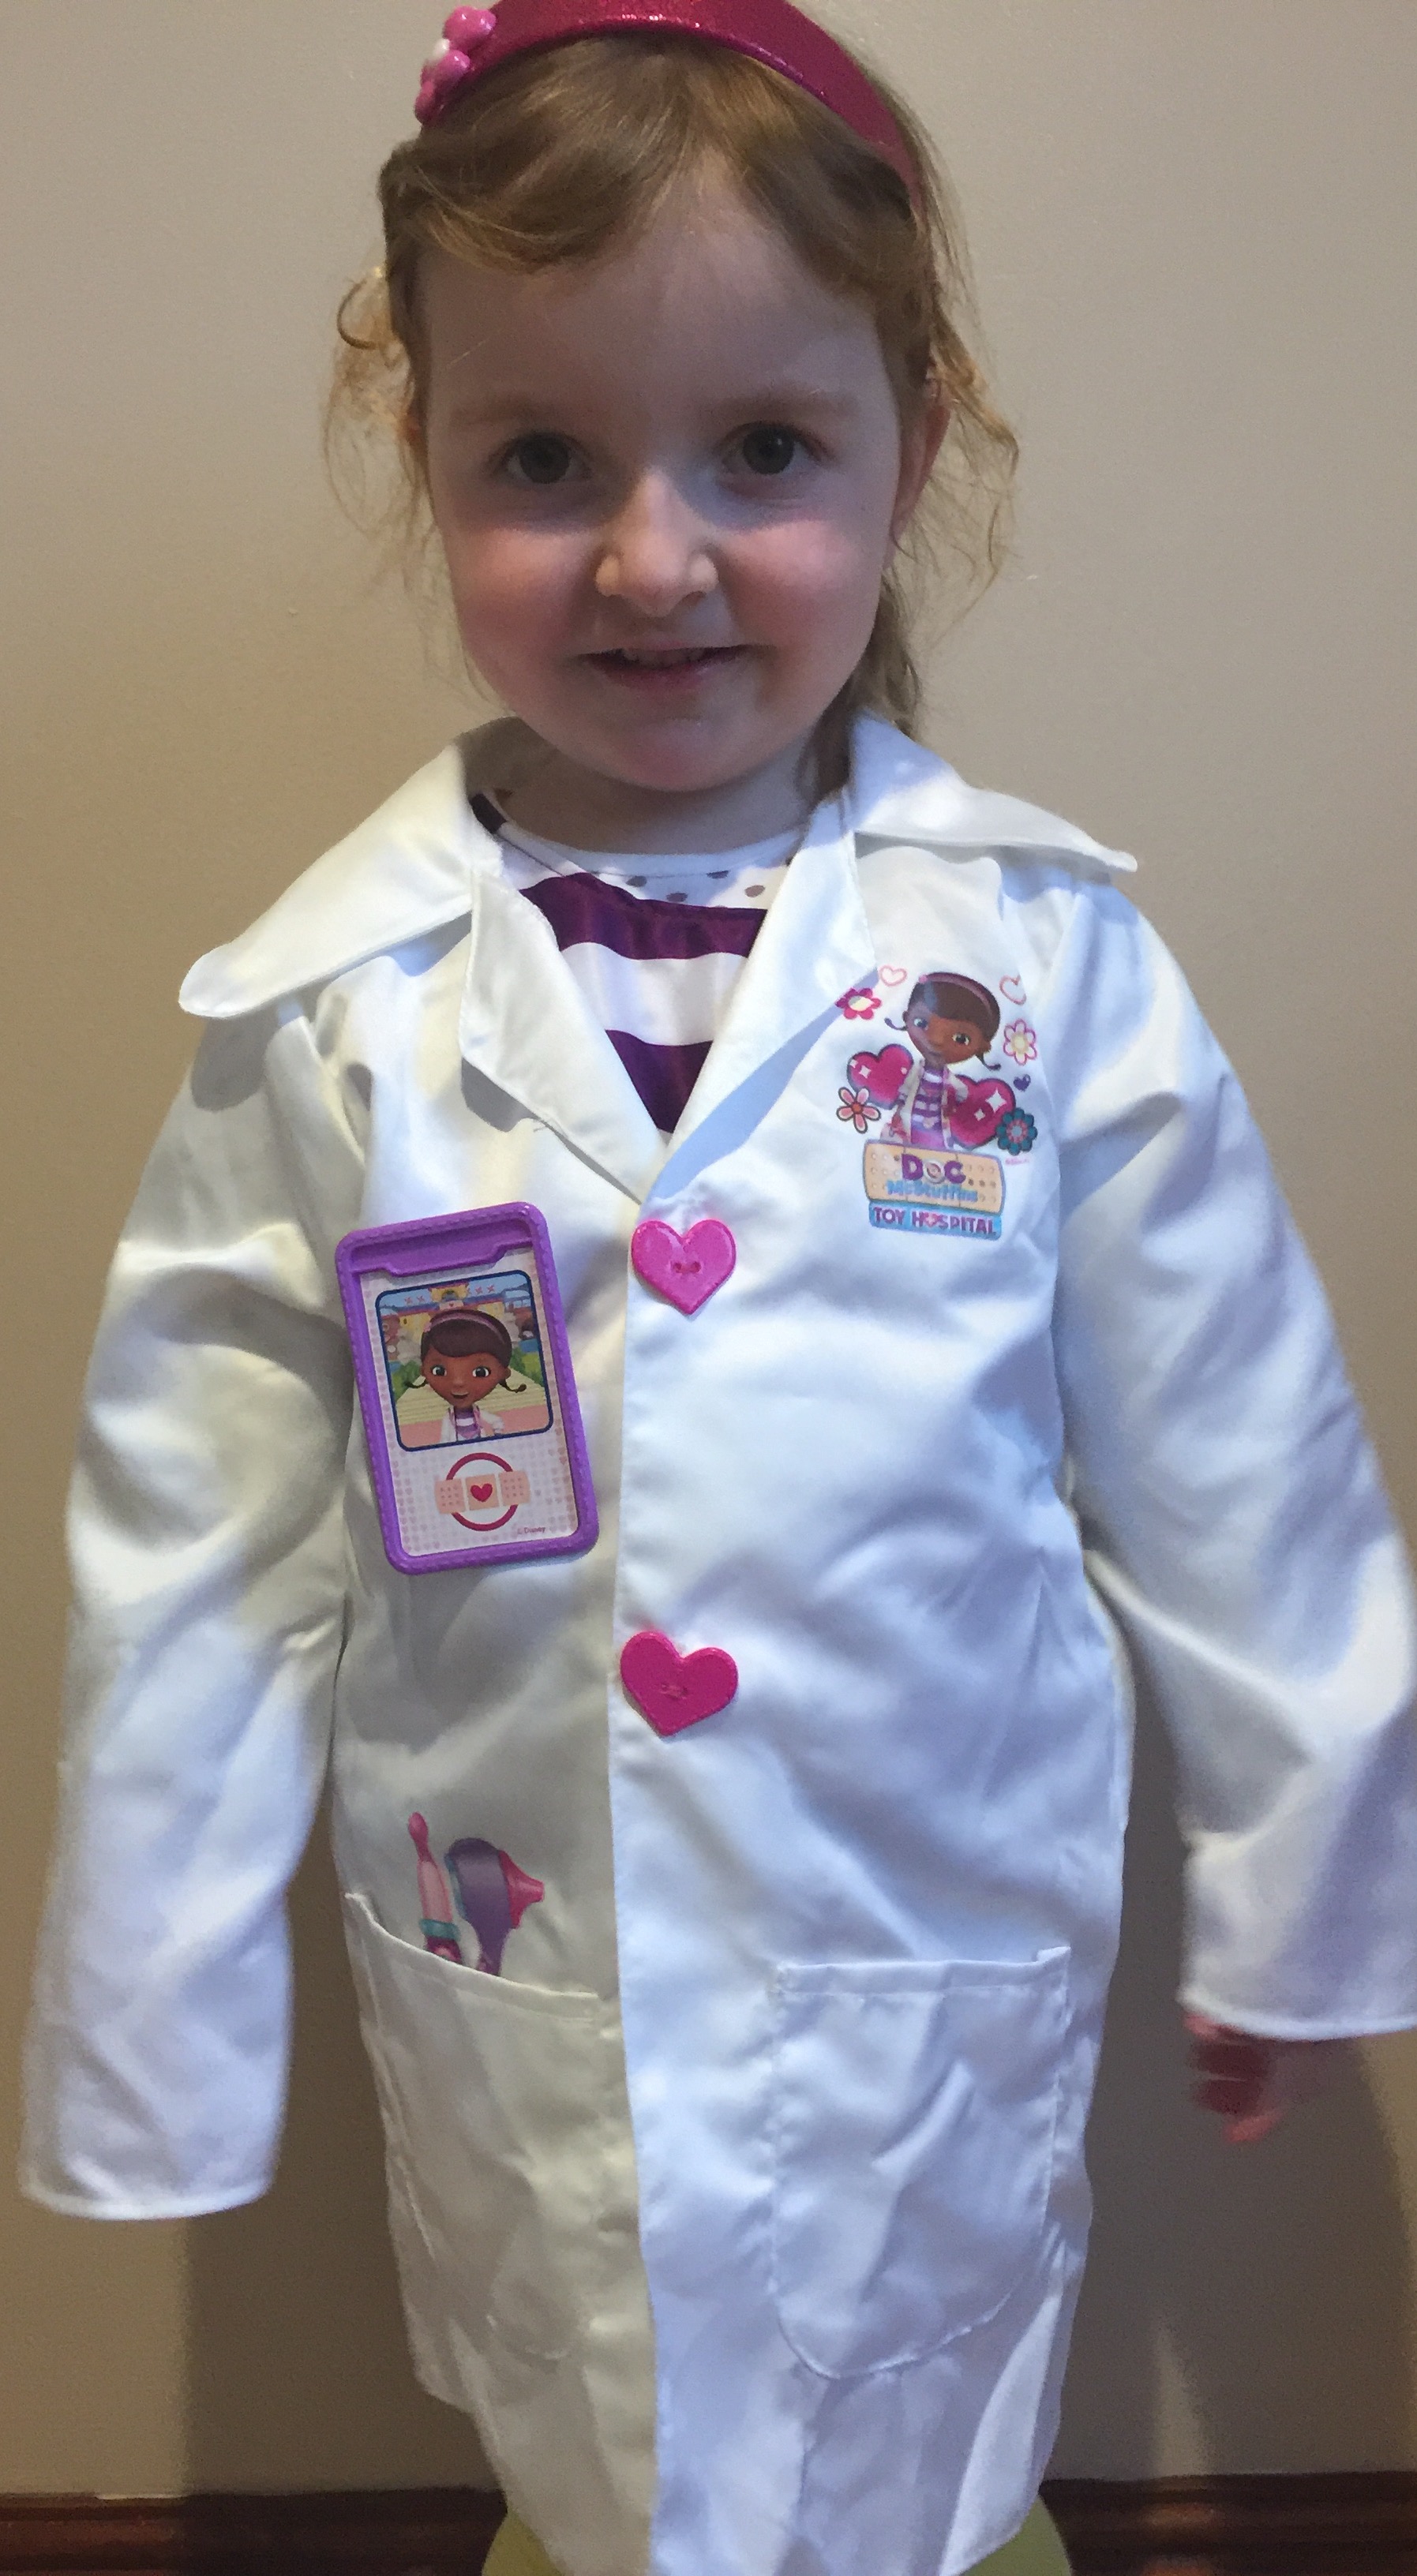 Transform Into A TV Favourite With The Doc McStuffins Dress Up And Accessories Set